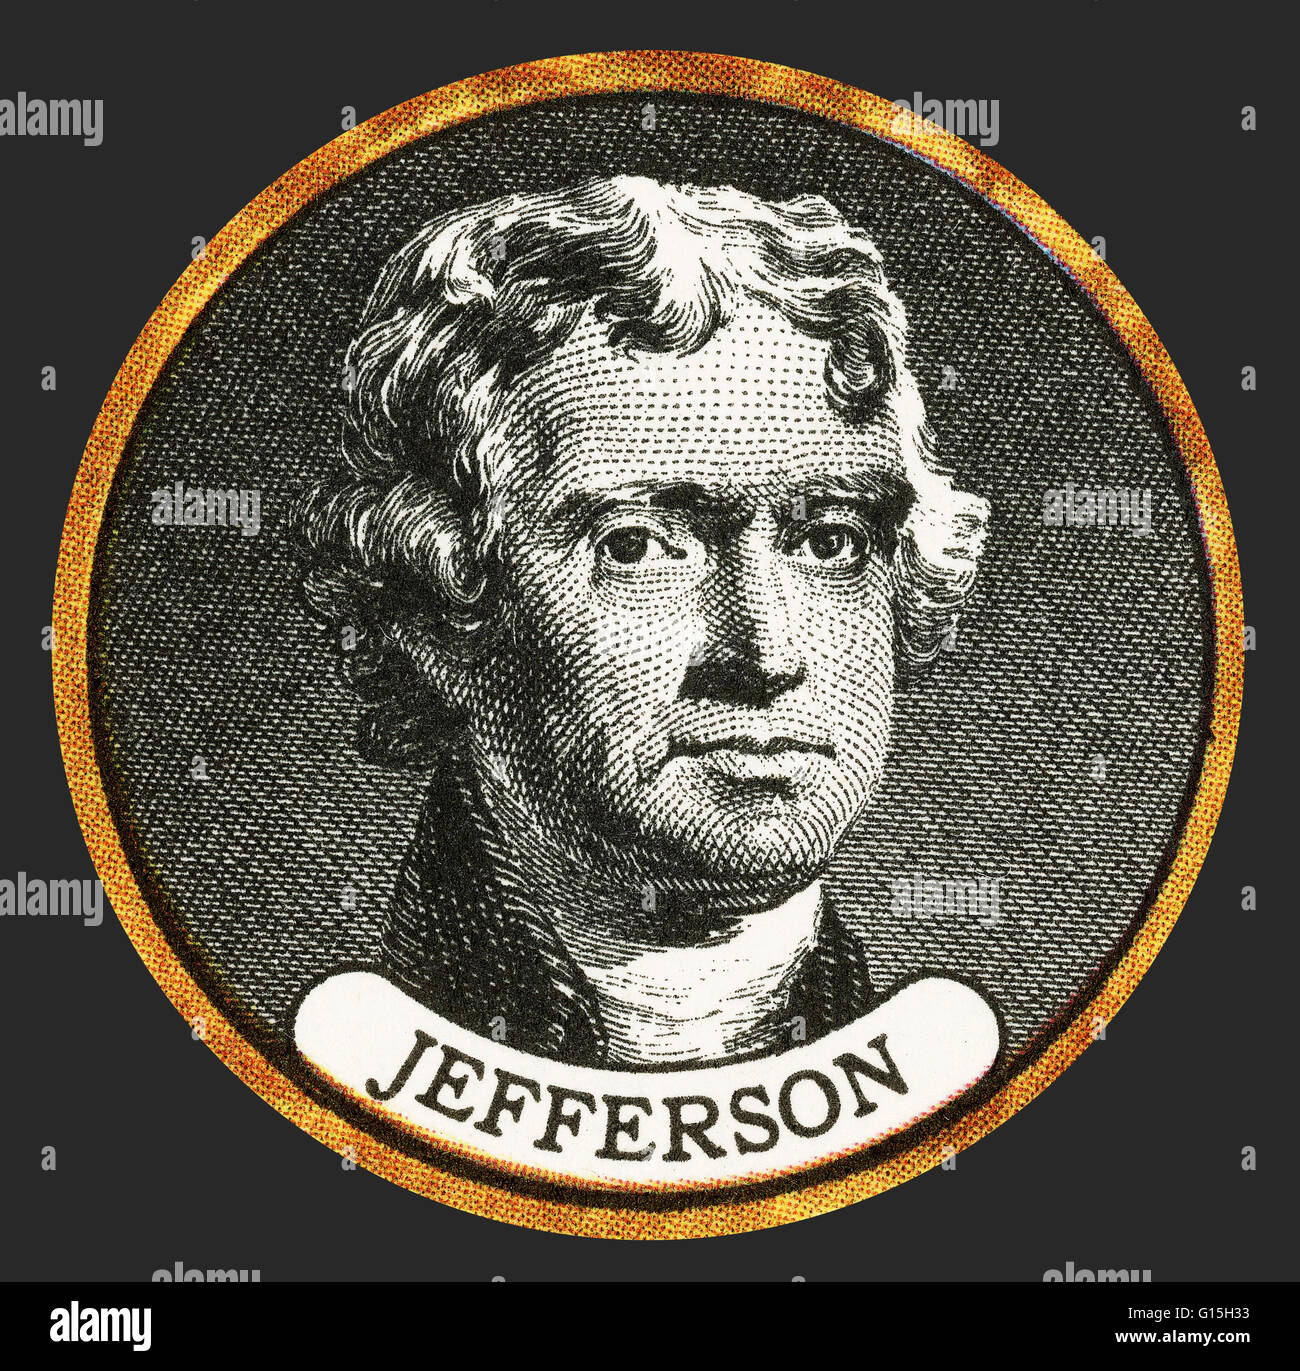 Thomas Jefferson (April 13, 1743 - July 4, 1826) was an American Founding Father, the principal author of the United States Declaration of Independence (1776) and third President of the United States (1801-1809). At the beginning of the American Revolutio Stock Photo